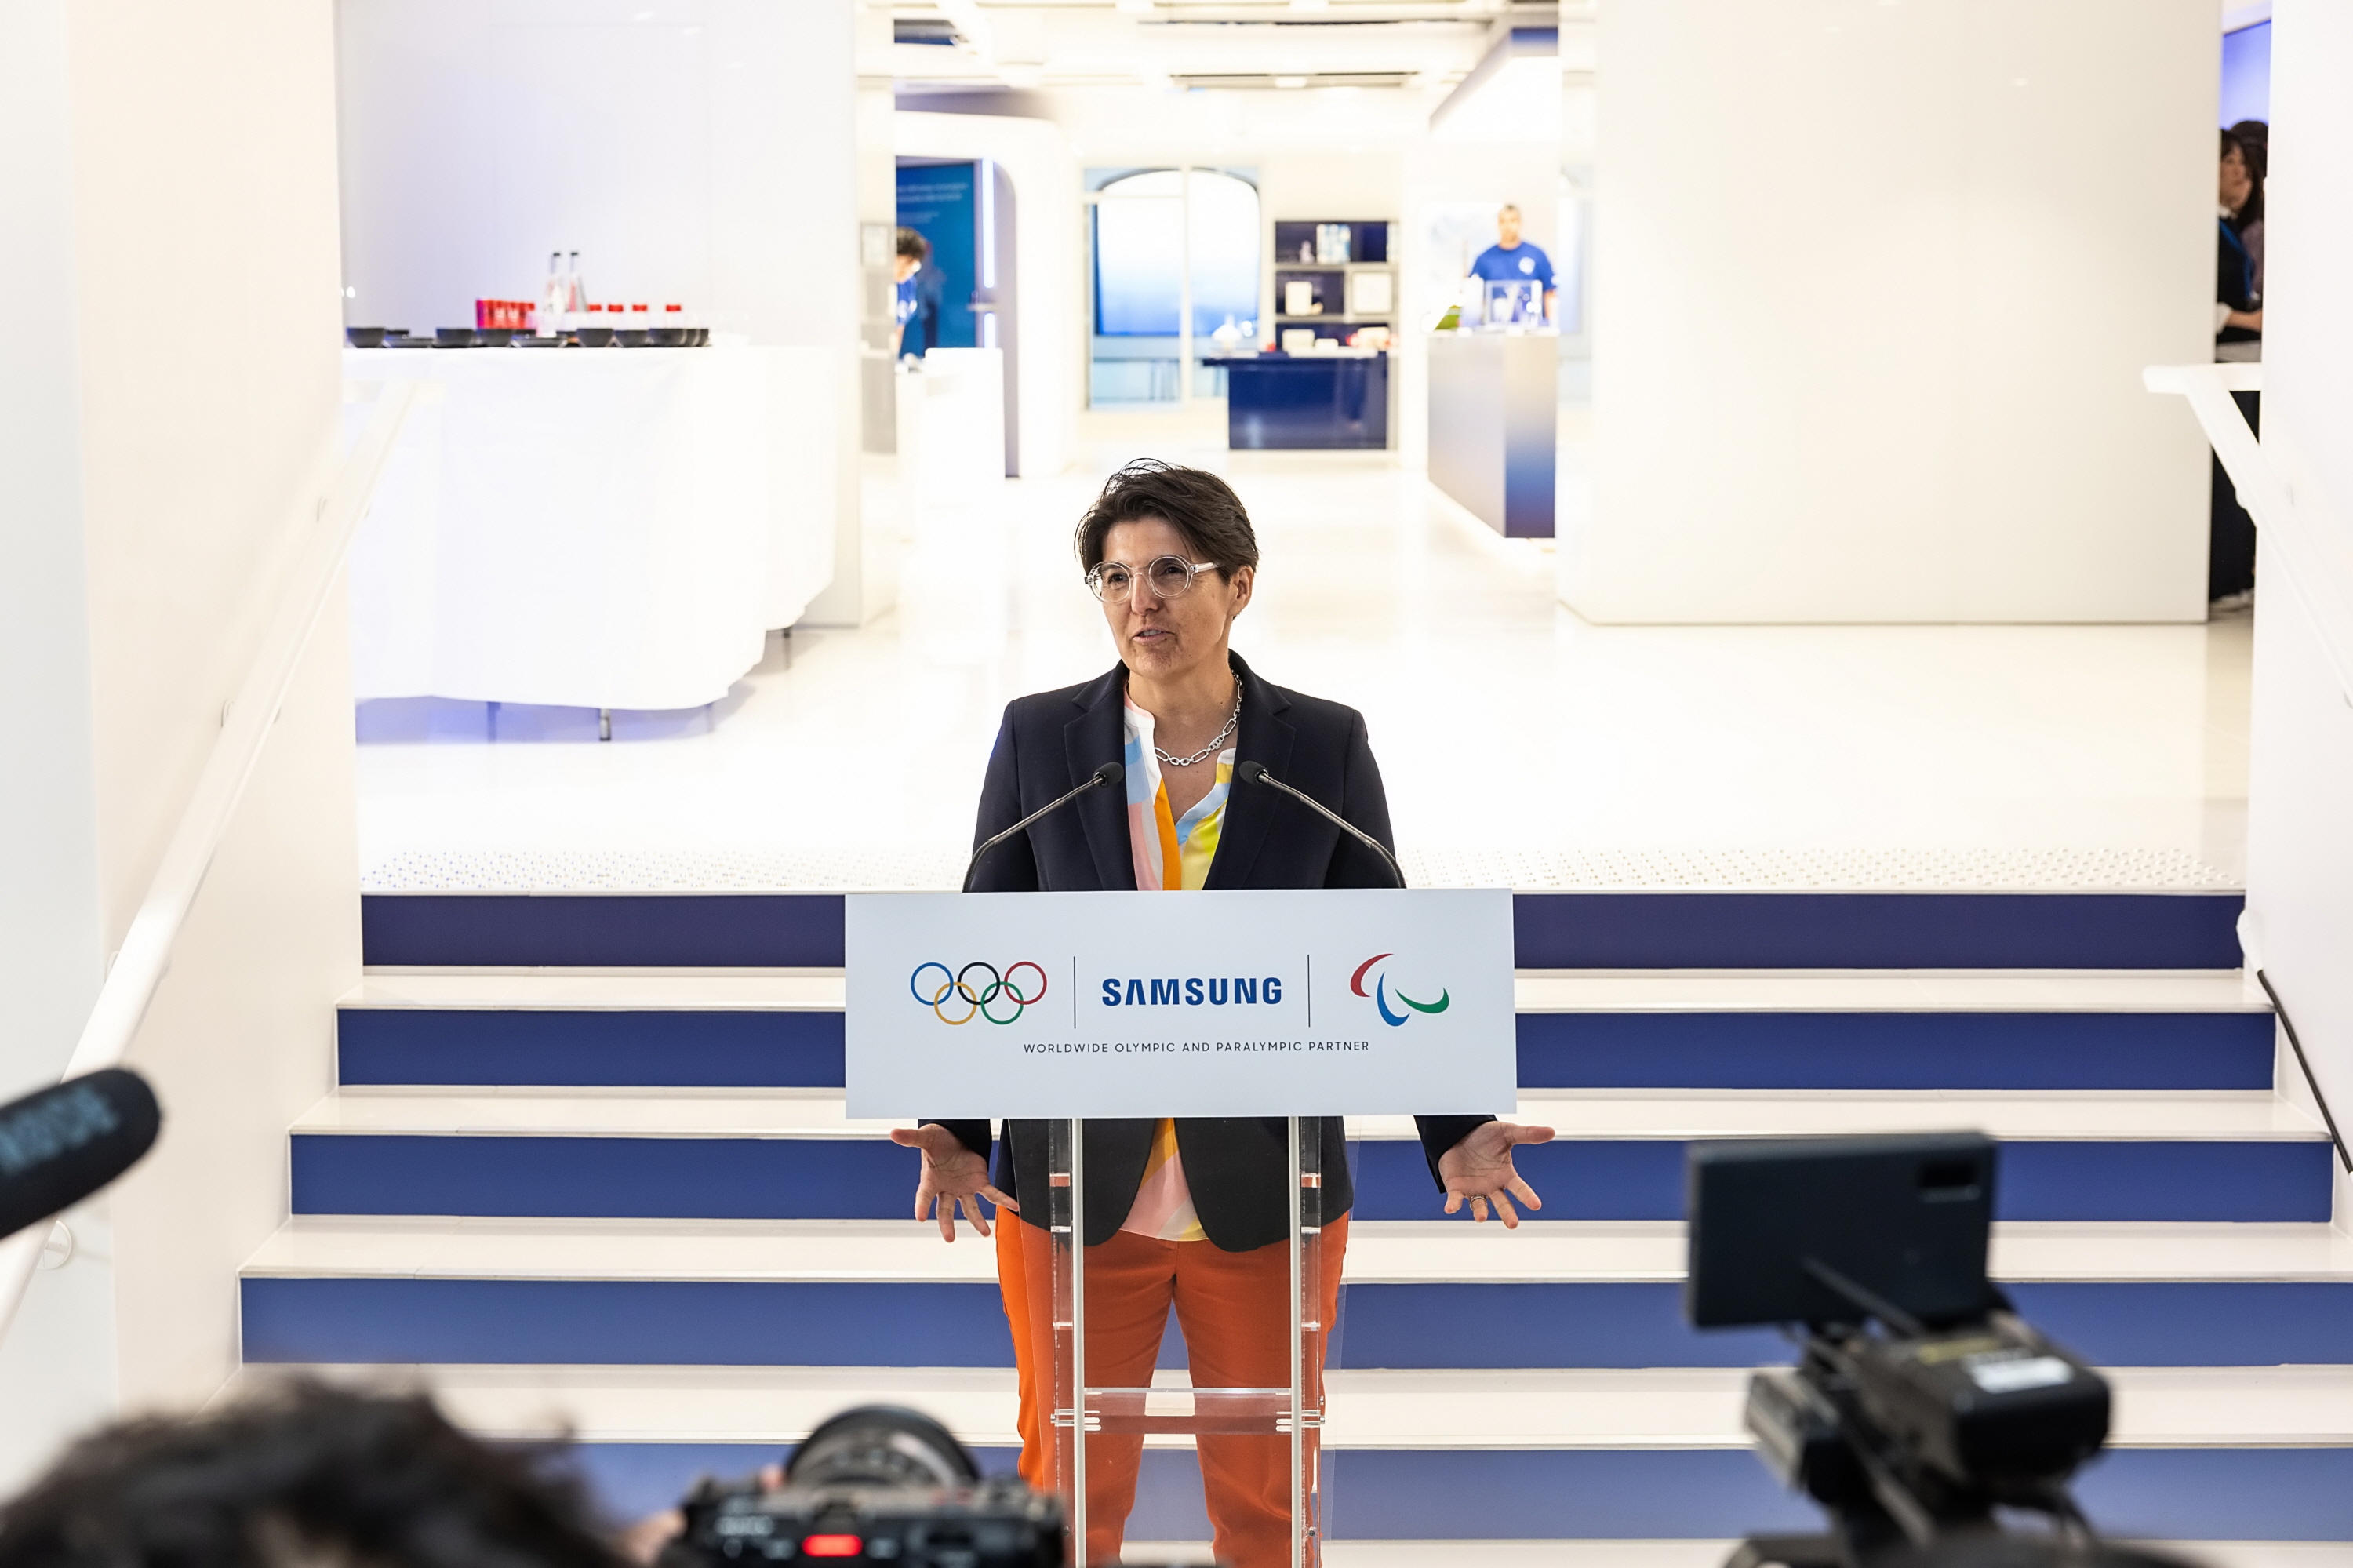 Olympic™ rendezvous @ Samsung_Anne-Sophie Voumard_IOC